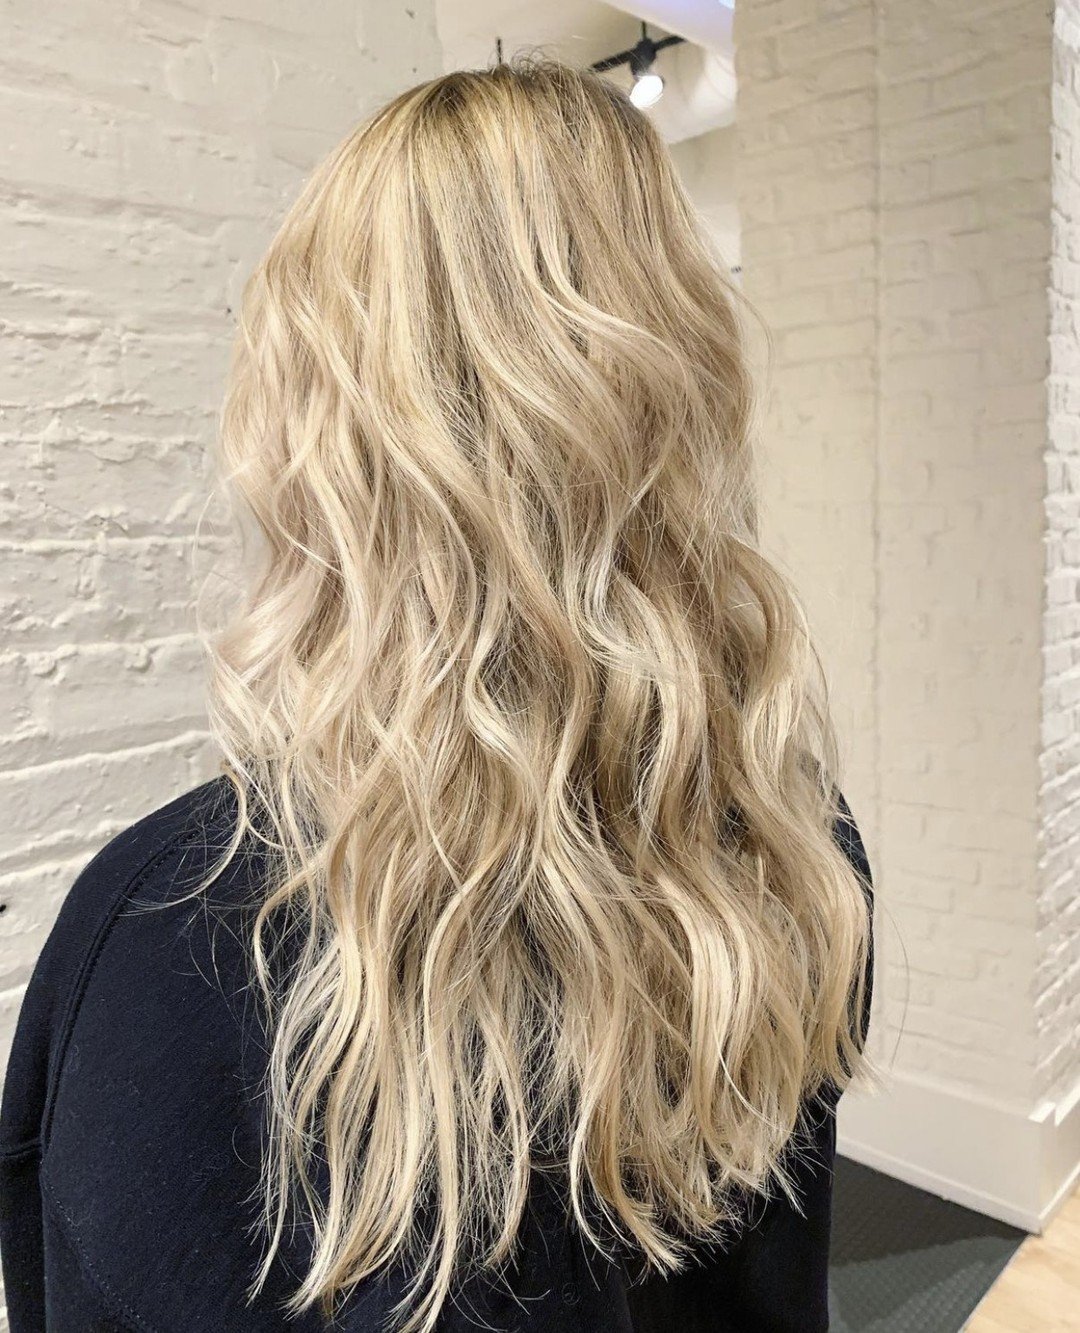 Name something better than fresh blonde hair... we'll wait. Beautiful color by @emilywynnebeauty⁠
⁠
▪️ Book your next consultation/appointment today! Click &ldquo;contact&rdquo; in our bio!⁠
▪️ Tag us in your looks! #michaelandmichaelsalon⁠
.⁠
.⁠
.⁠
